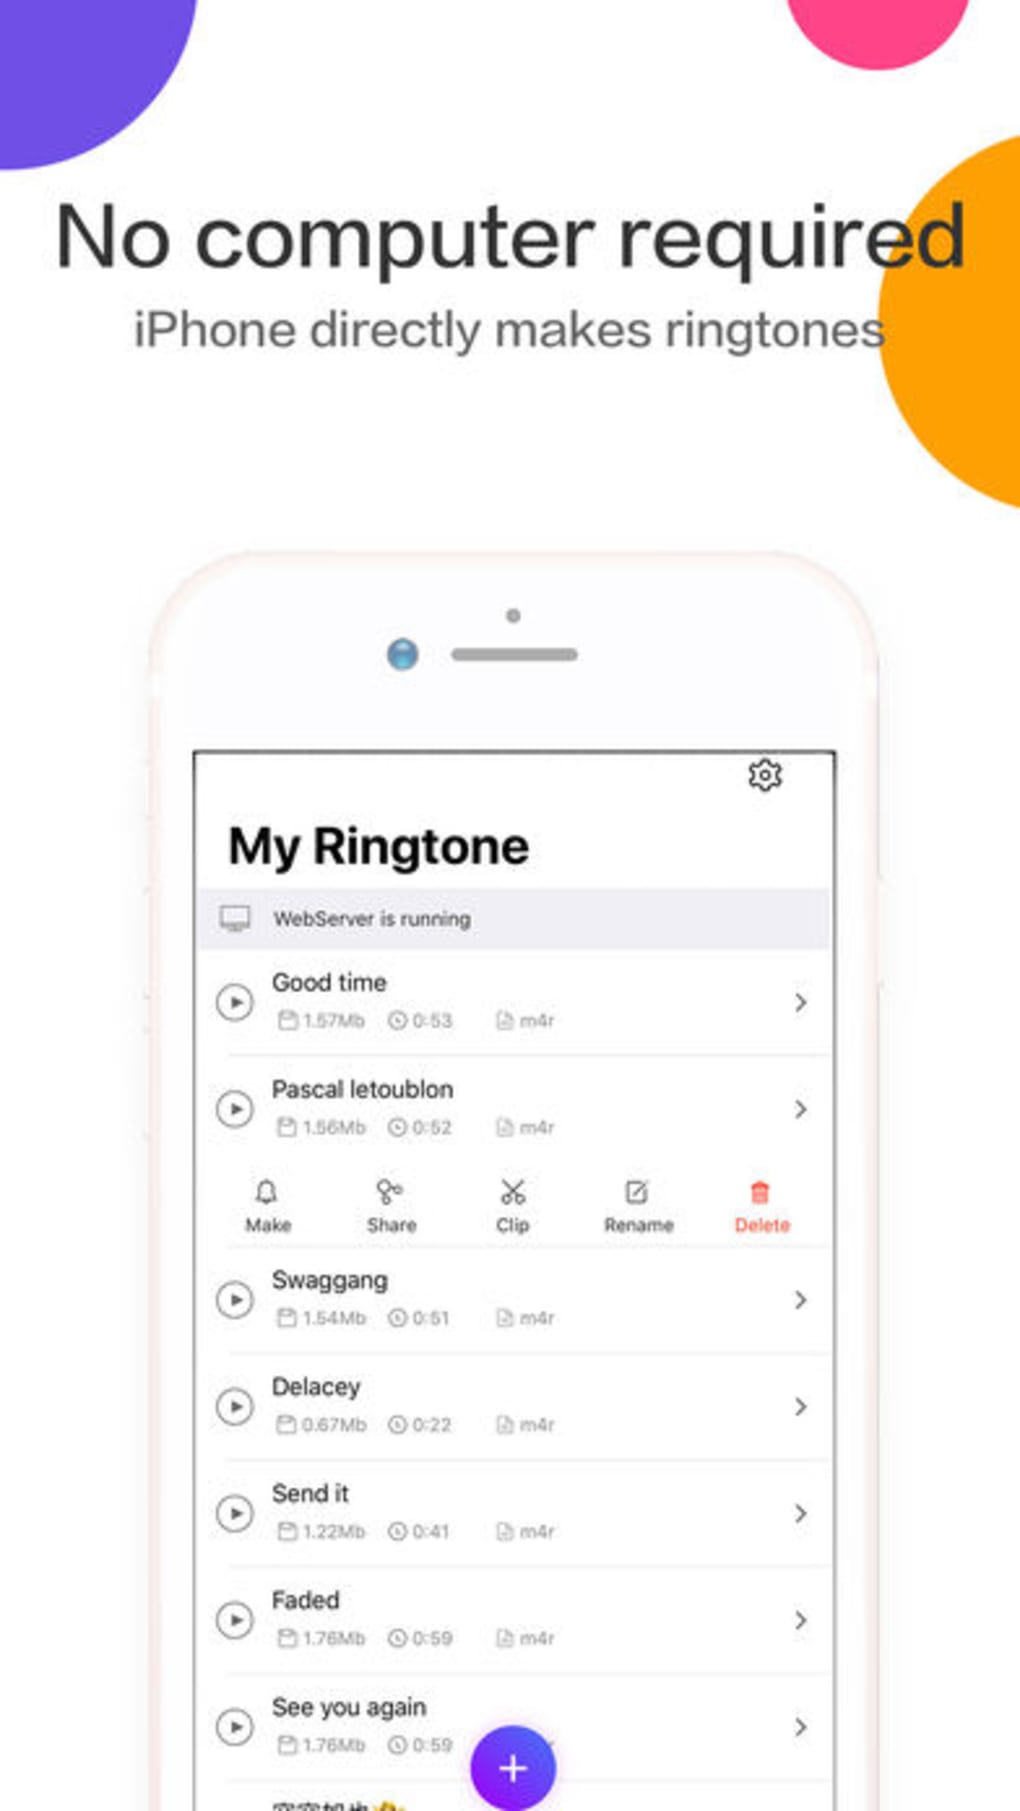 Cleartones: The Least Annoying Ringtones Ever | WIRED